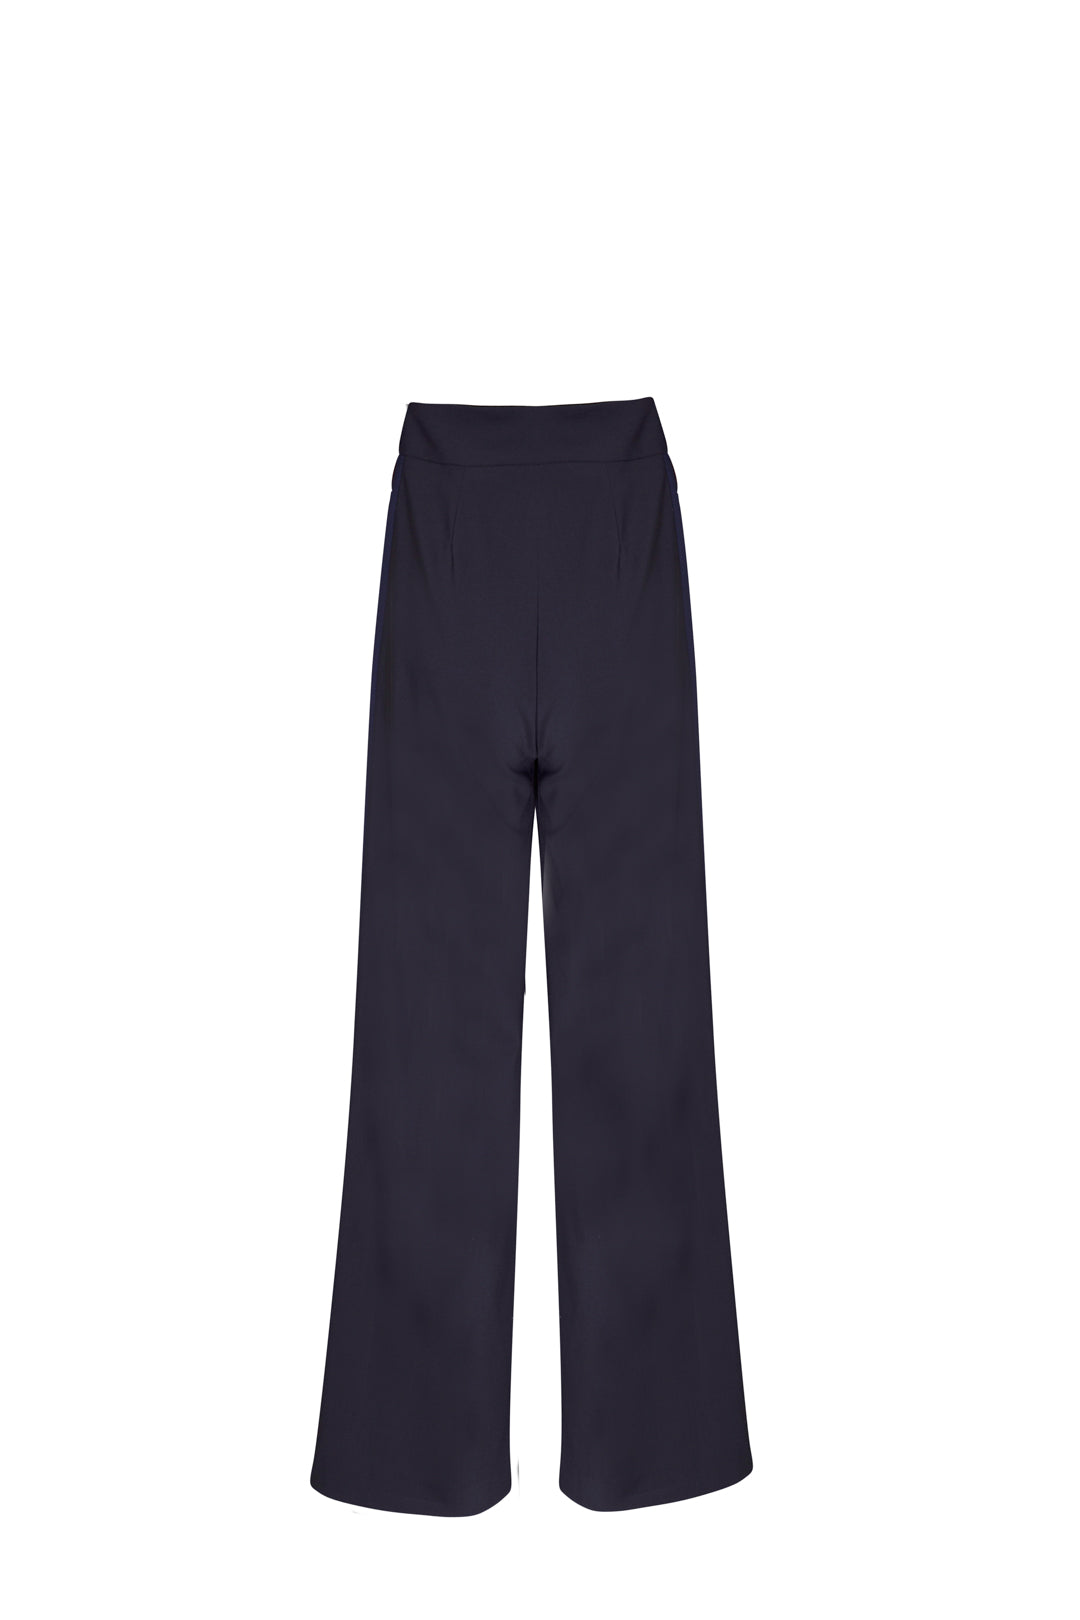 NAVY PALAZZO PANTS WITH CONTRASTING BLUE SIDE STRIPE